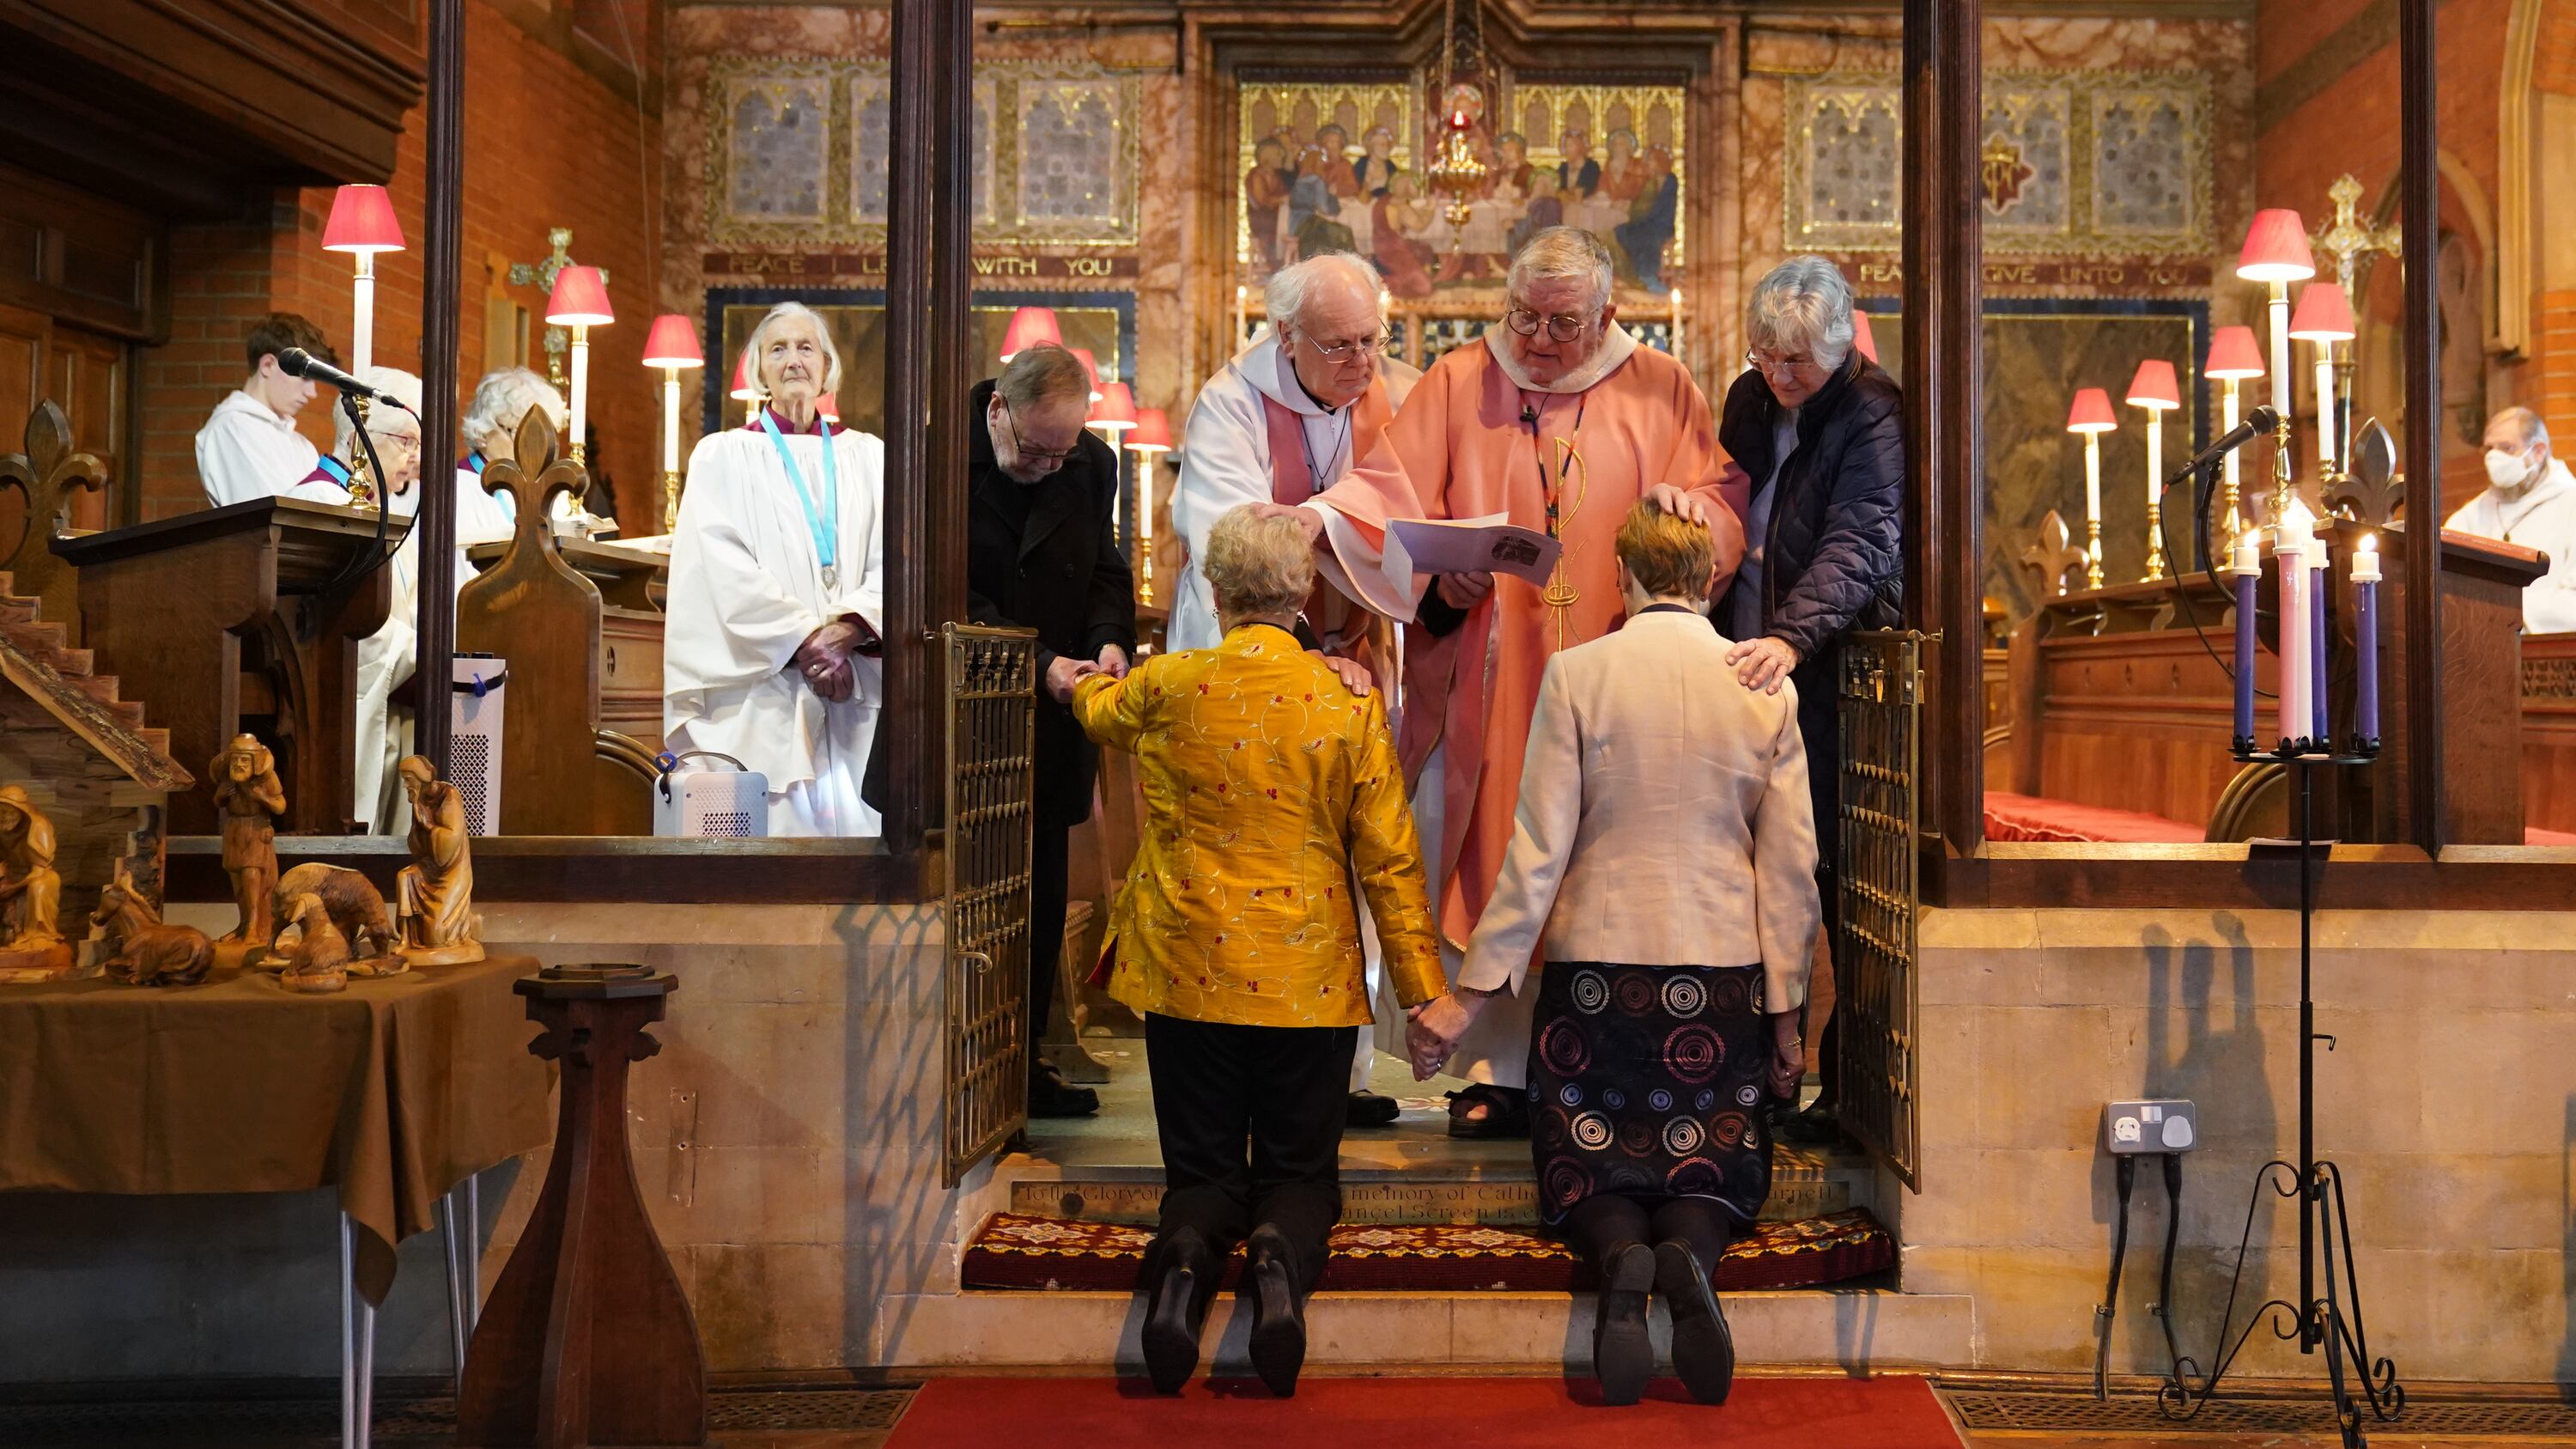 Catherine Bond (left) and Jane Pearce were blessed at St John the Baptist Church in Felixstowe, Suffolk, after the use of prayers of blessing for same-sex couples in Church of England services were approved by the House of Bishops